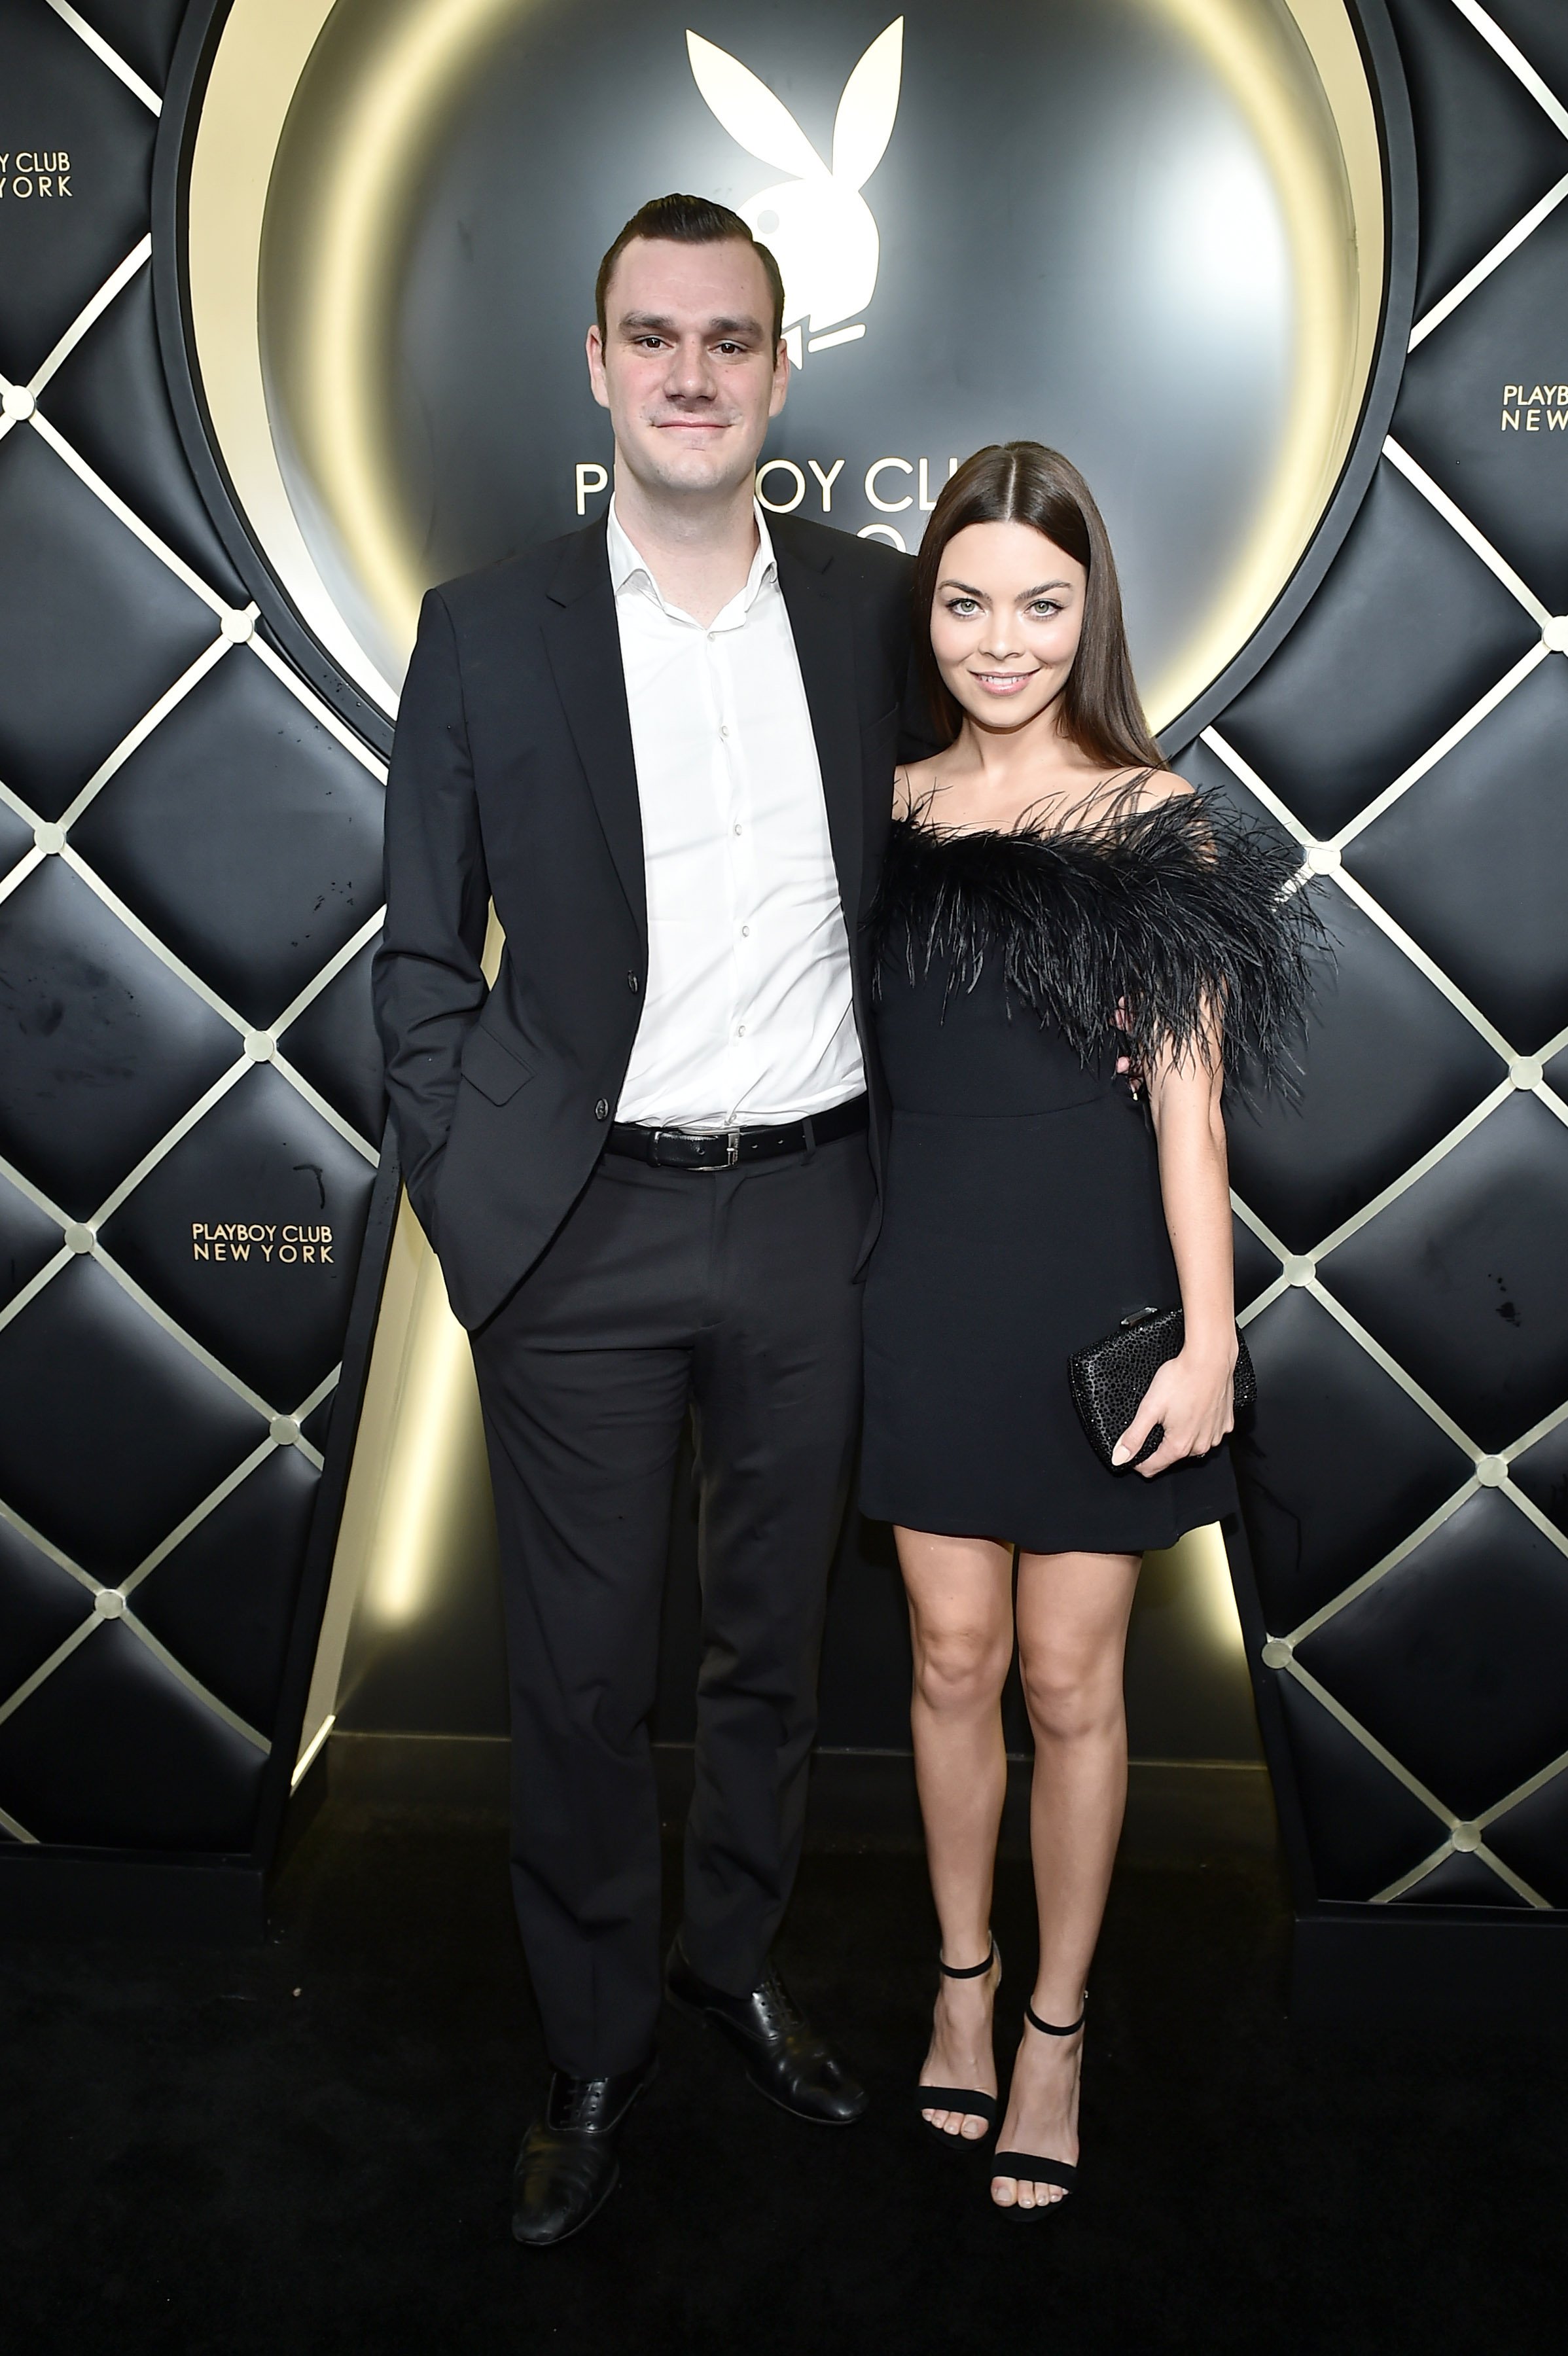 Cooper Hefner and his wife Scarlett Byrne are photographed as they arrive at Playboy Club New York Grand Opening in New York City | Source: Getty Images